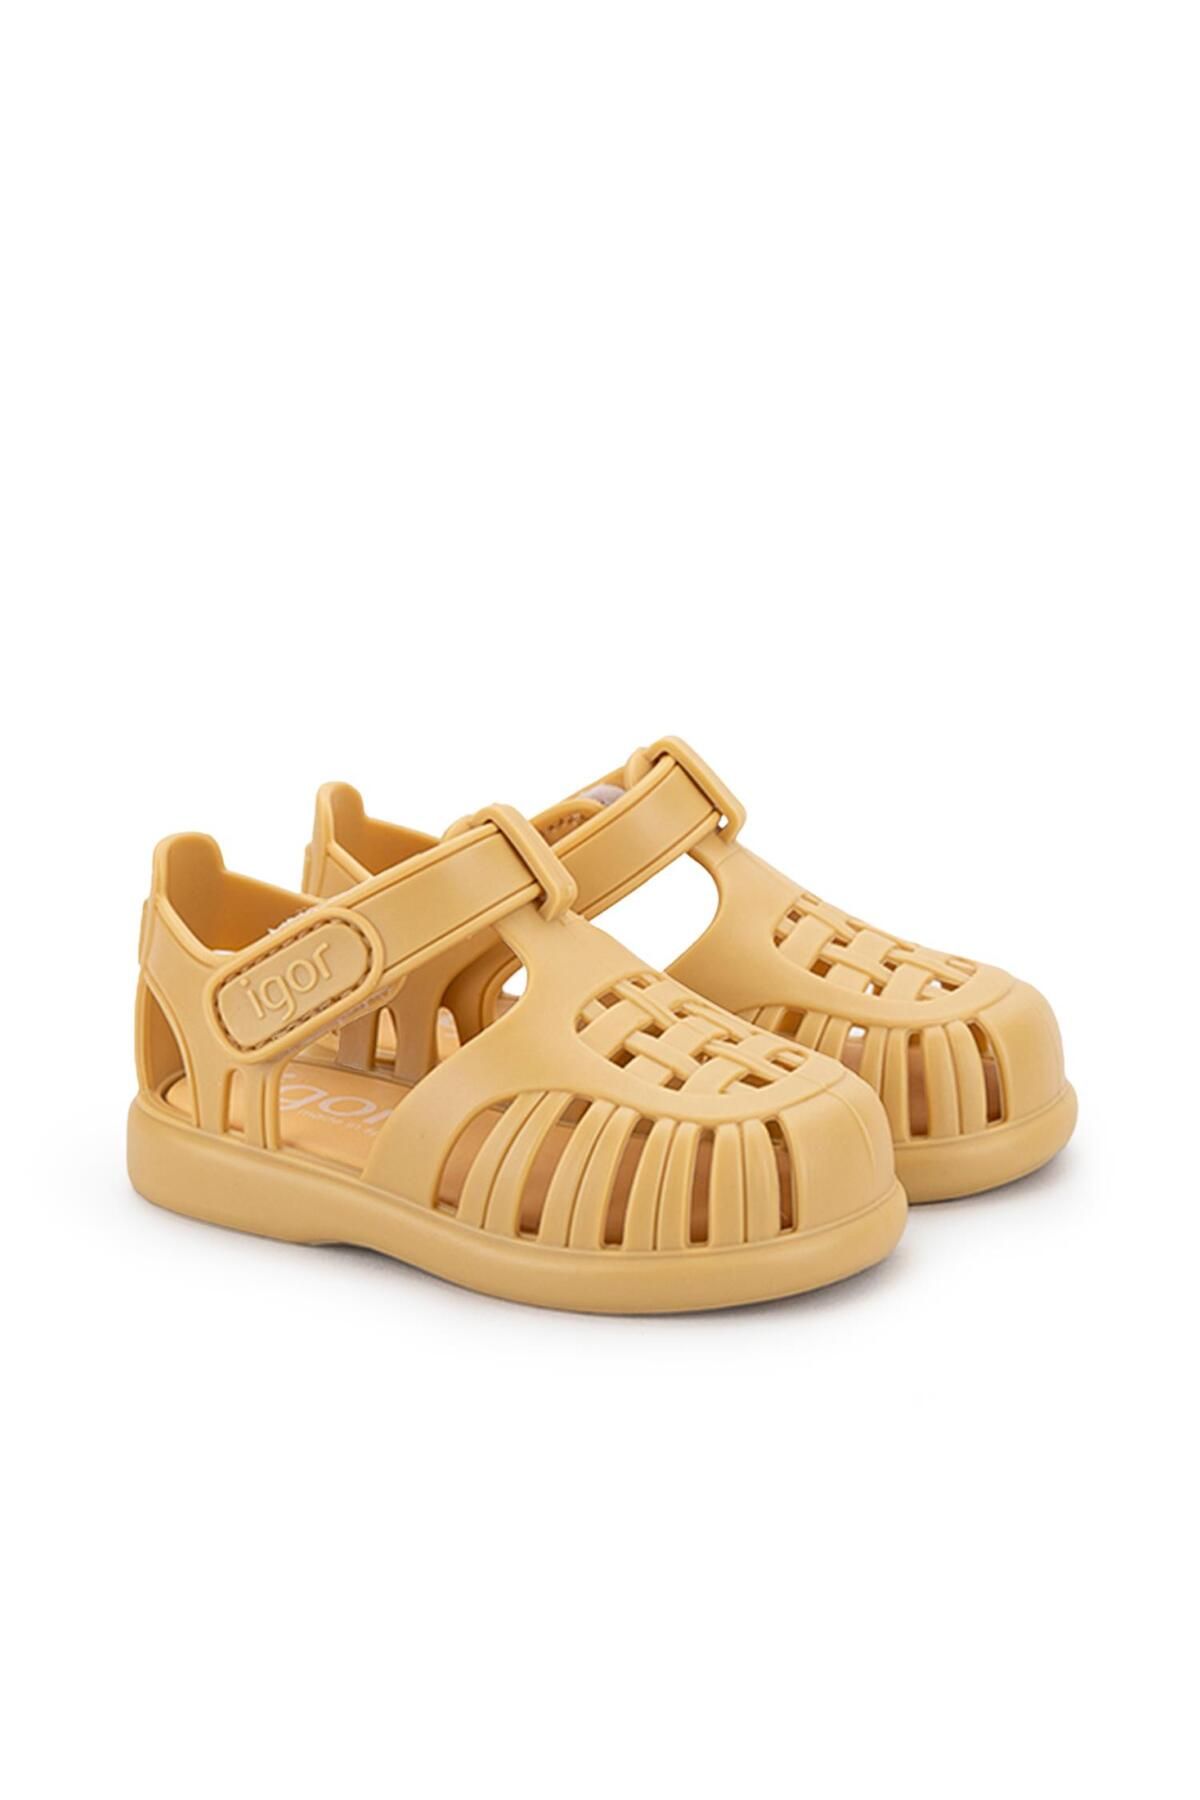 IGOR Sandals Sondals S10271 TOBBY SOLID